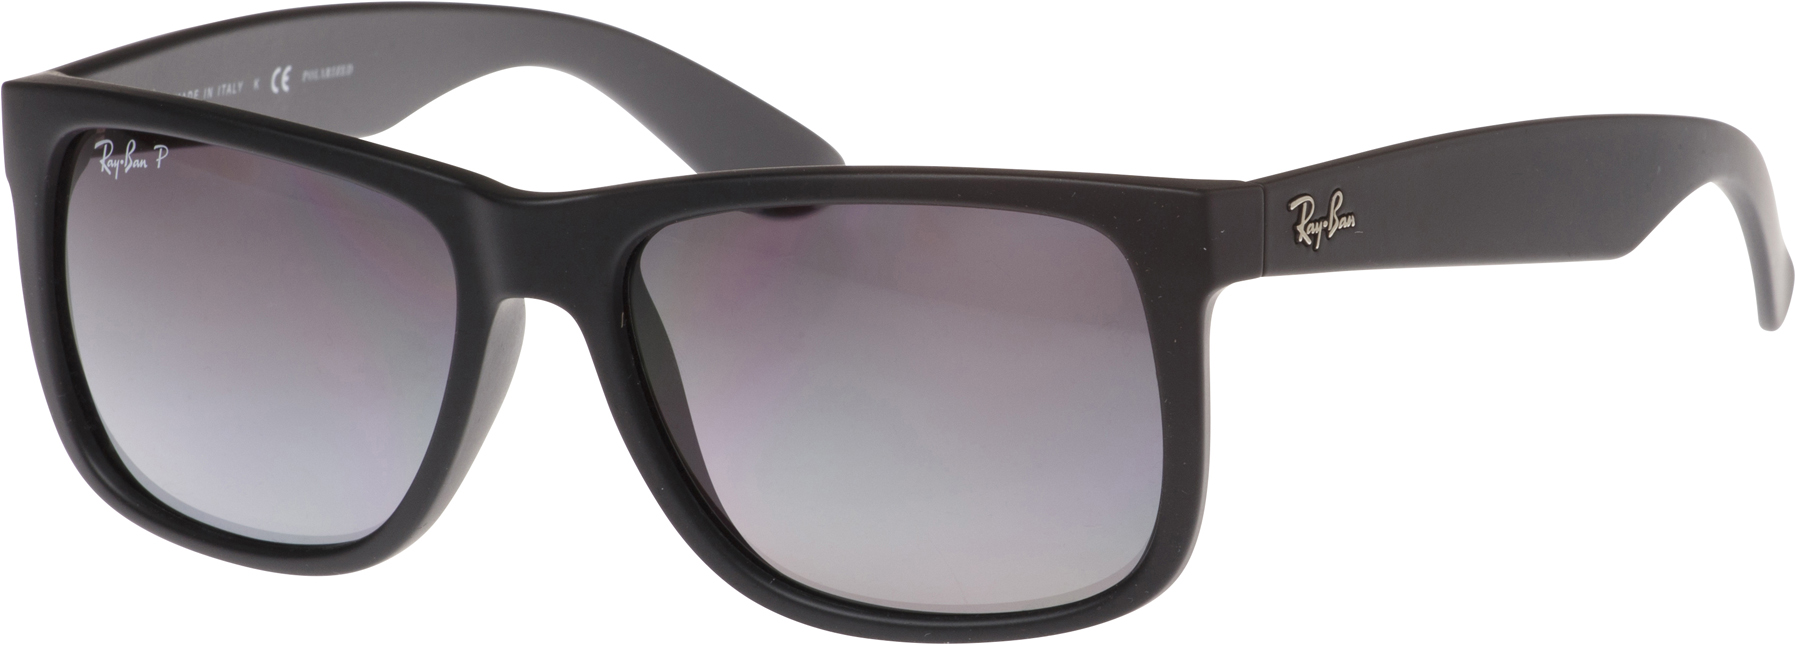 Ray-Ban JUSTIN 4165 image number null